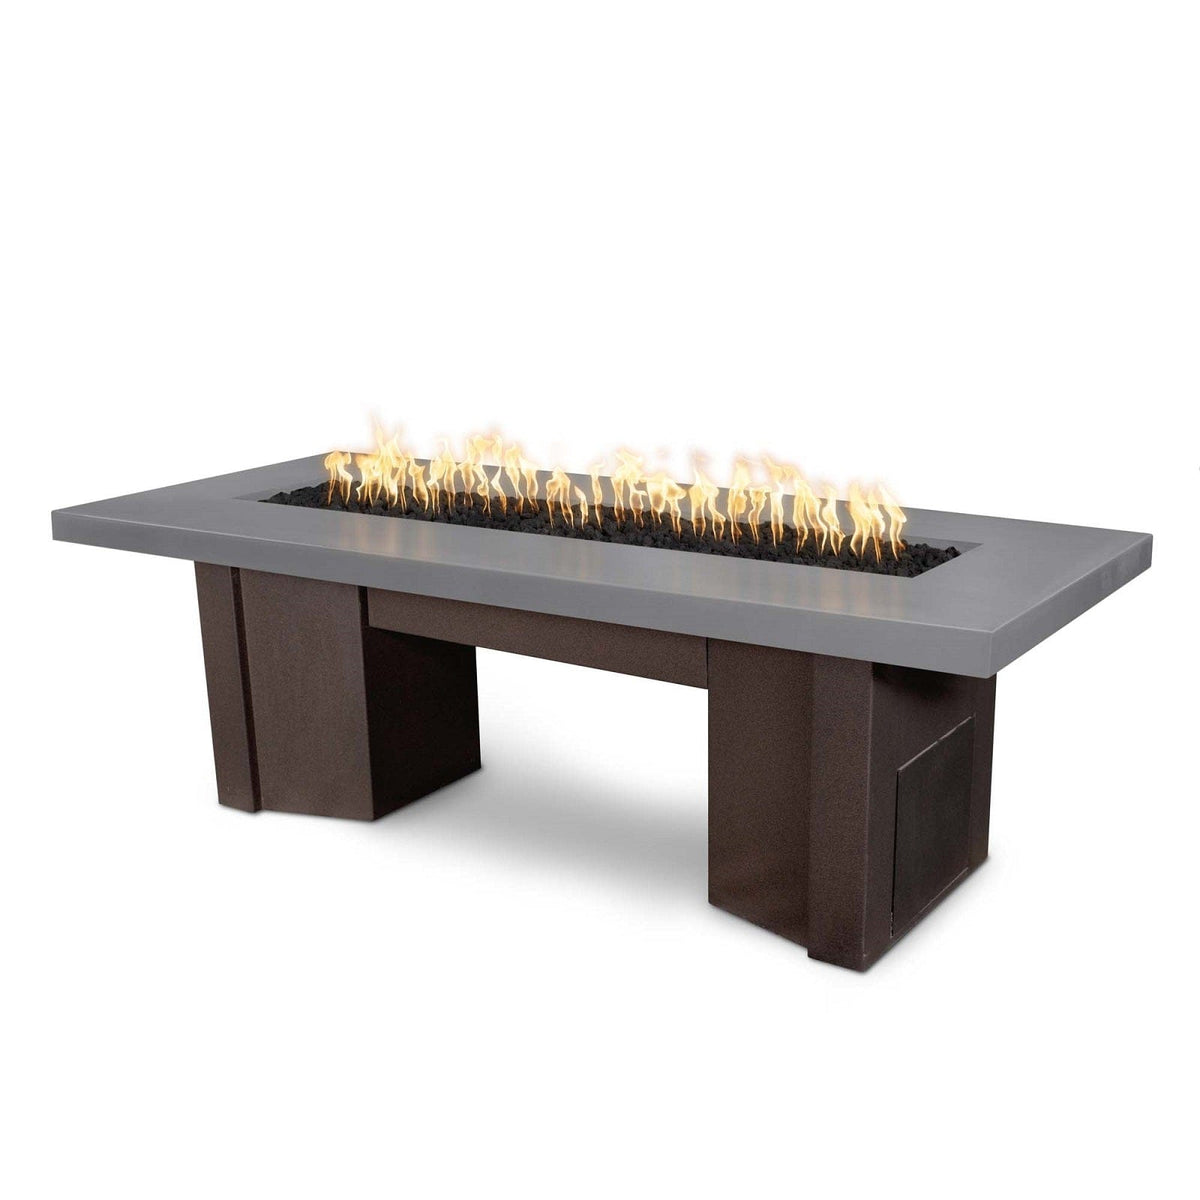 The Outdoor Plus Fire Features Natural Gray (-NGY) / Java Powder Coated Steel (-JAV) The Outdoor Plus 78&quot; Alameda Fire Table Smooth Concrete in Natural Gas - Flame Sense System with Push Button Spark Igniter / OPT-ALMGFRC78FSEN-NG